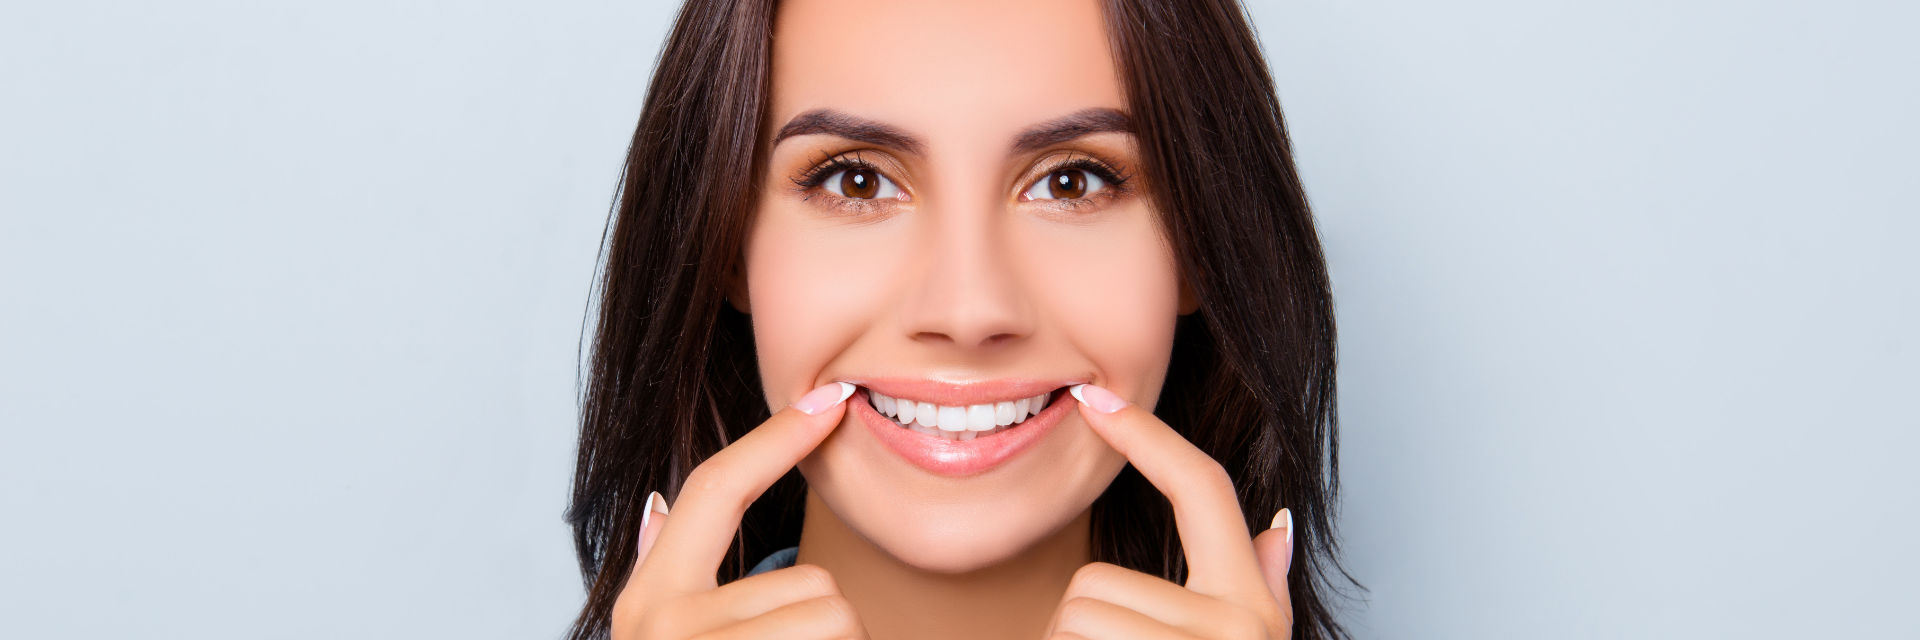 Smiling woman pointing at her beautiful teeth.